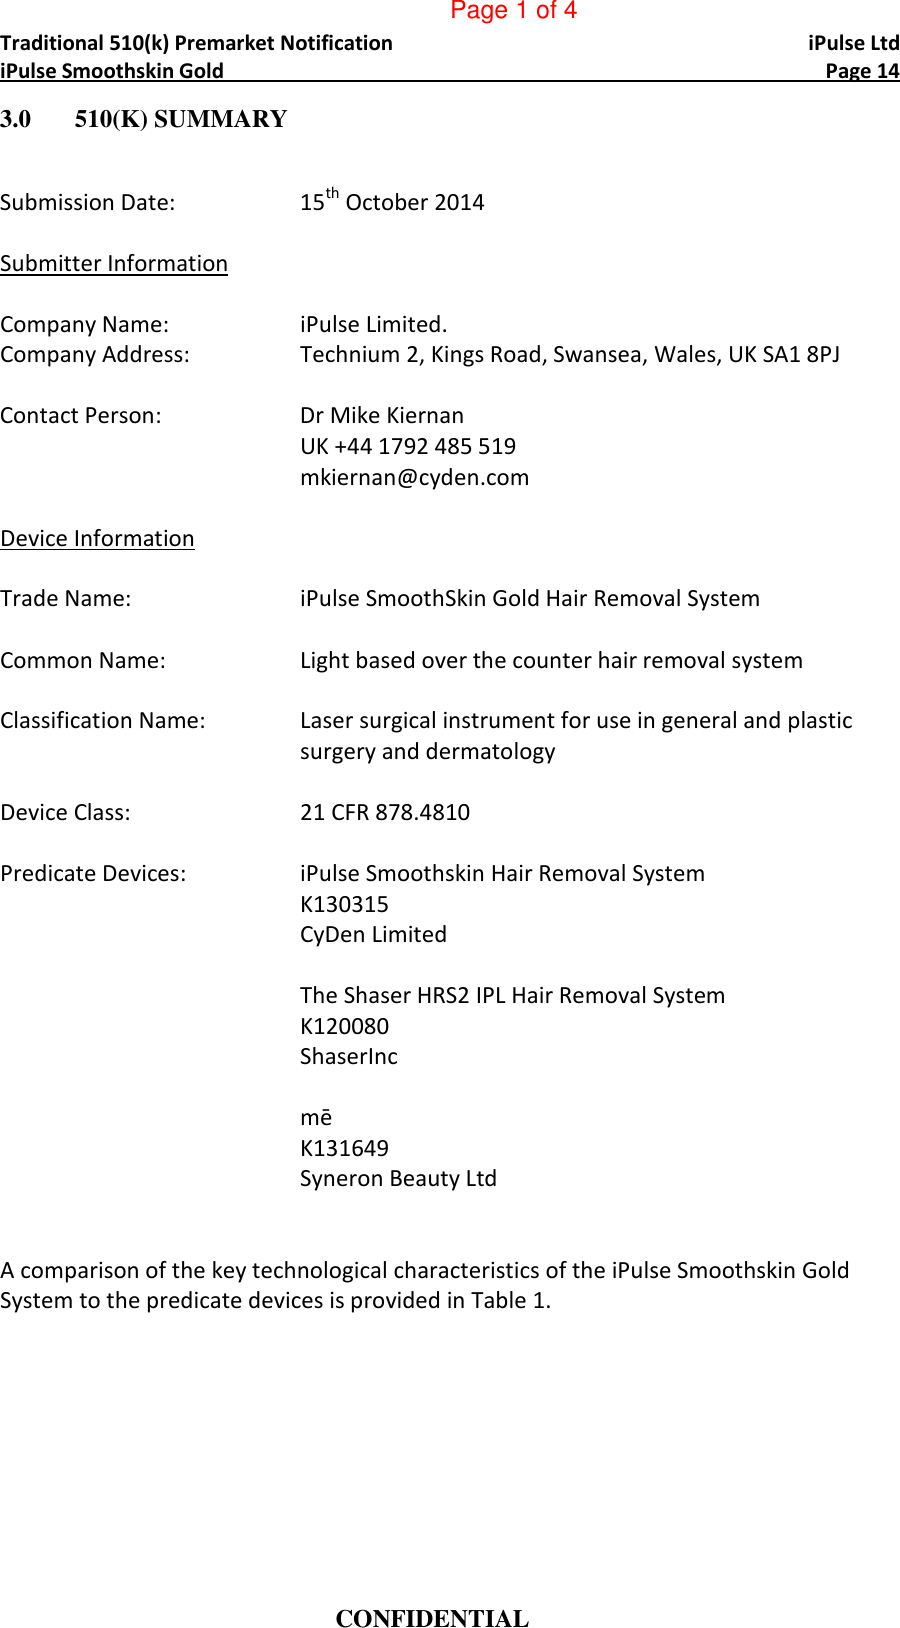 Page 4 of 7 - ORIGINAL [510(K)] PREMARKET NOTIFICATION * Report K143003 - I Pulse Smooth Skin Gold Hair Removal System